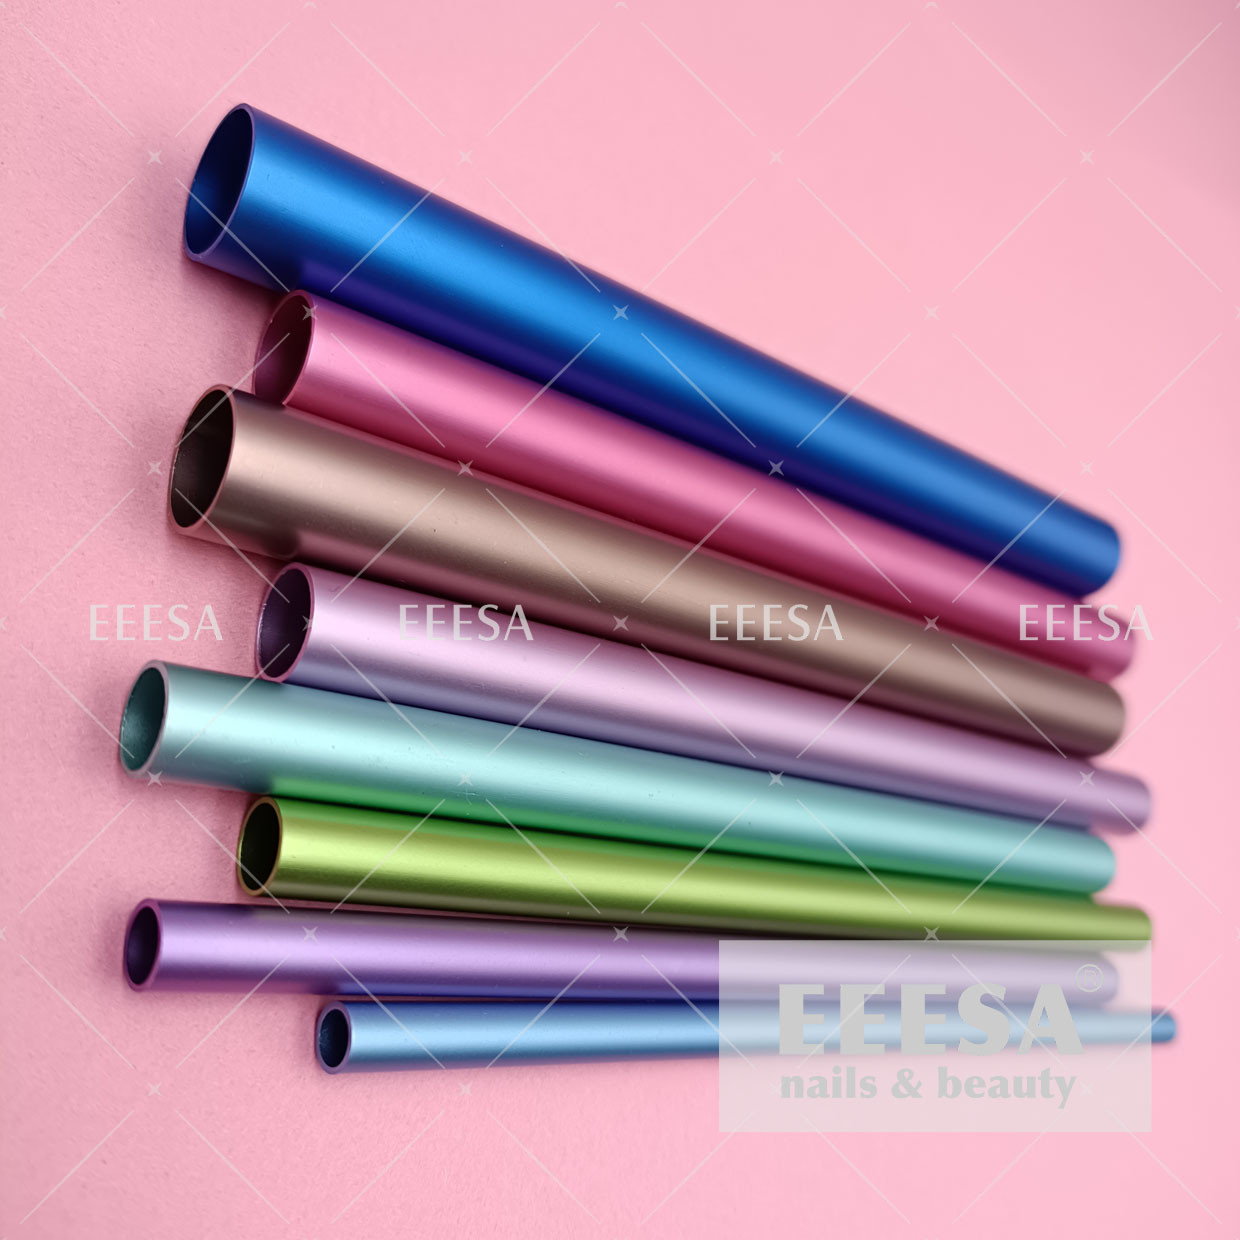  Manicure stick for extra long acrylic nail tips 8 pcs nails c curve rod sticks Manufactures